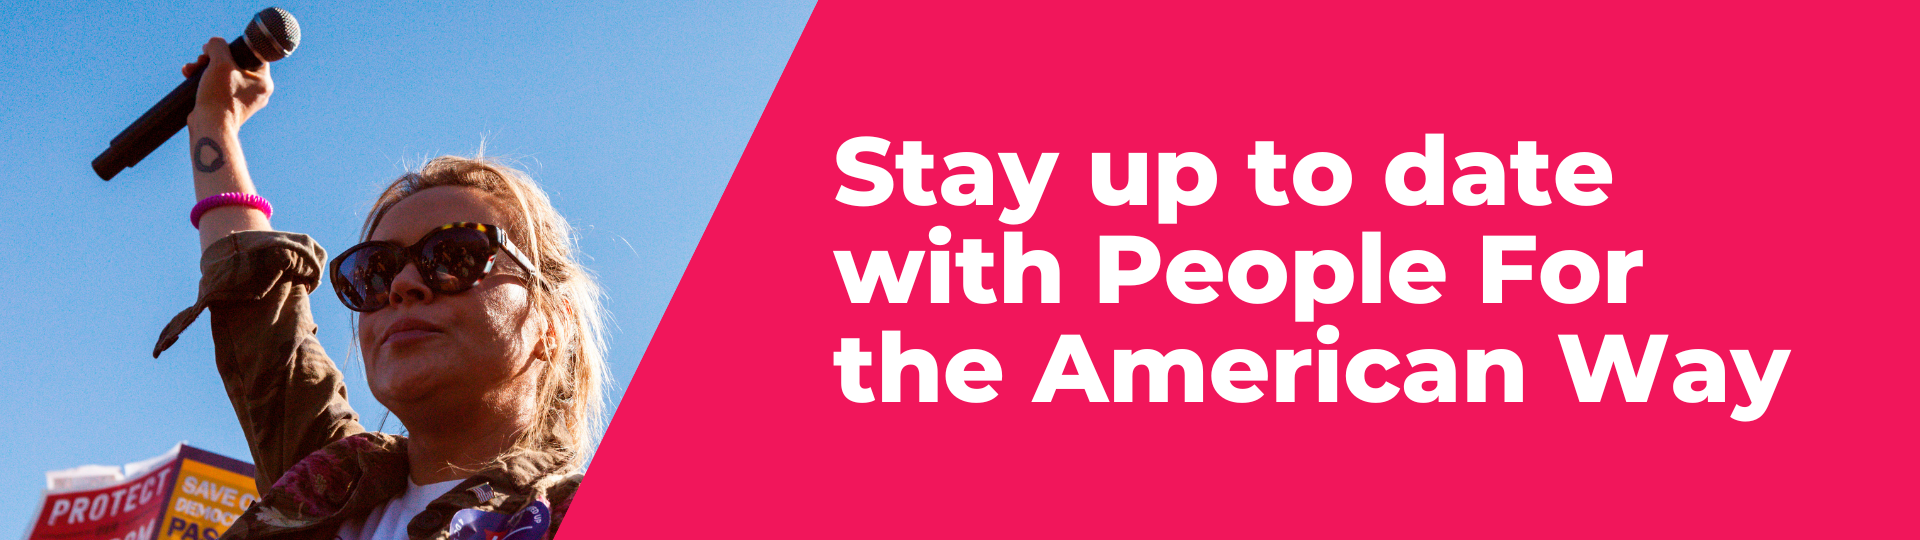 Picture of Alyssa Milano with fist in the air. Red background with white text on the right side that reads "Stay up to date with People For the American Way"